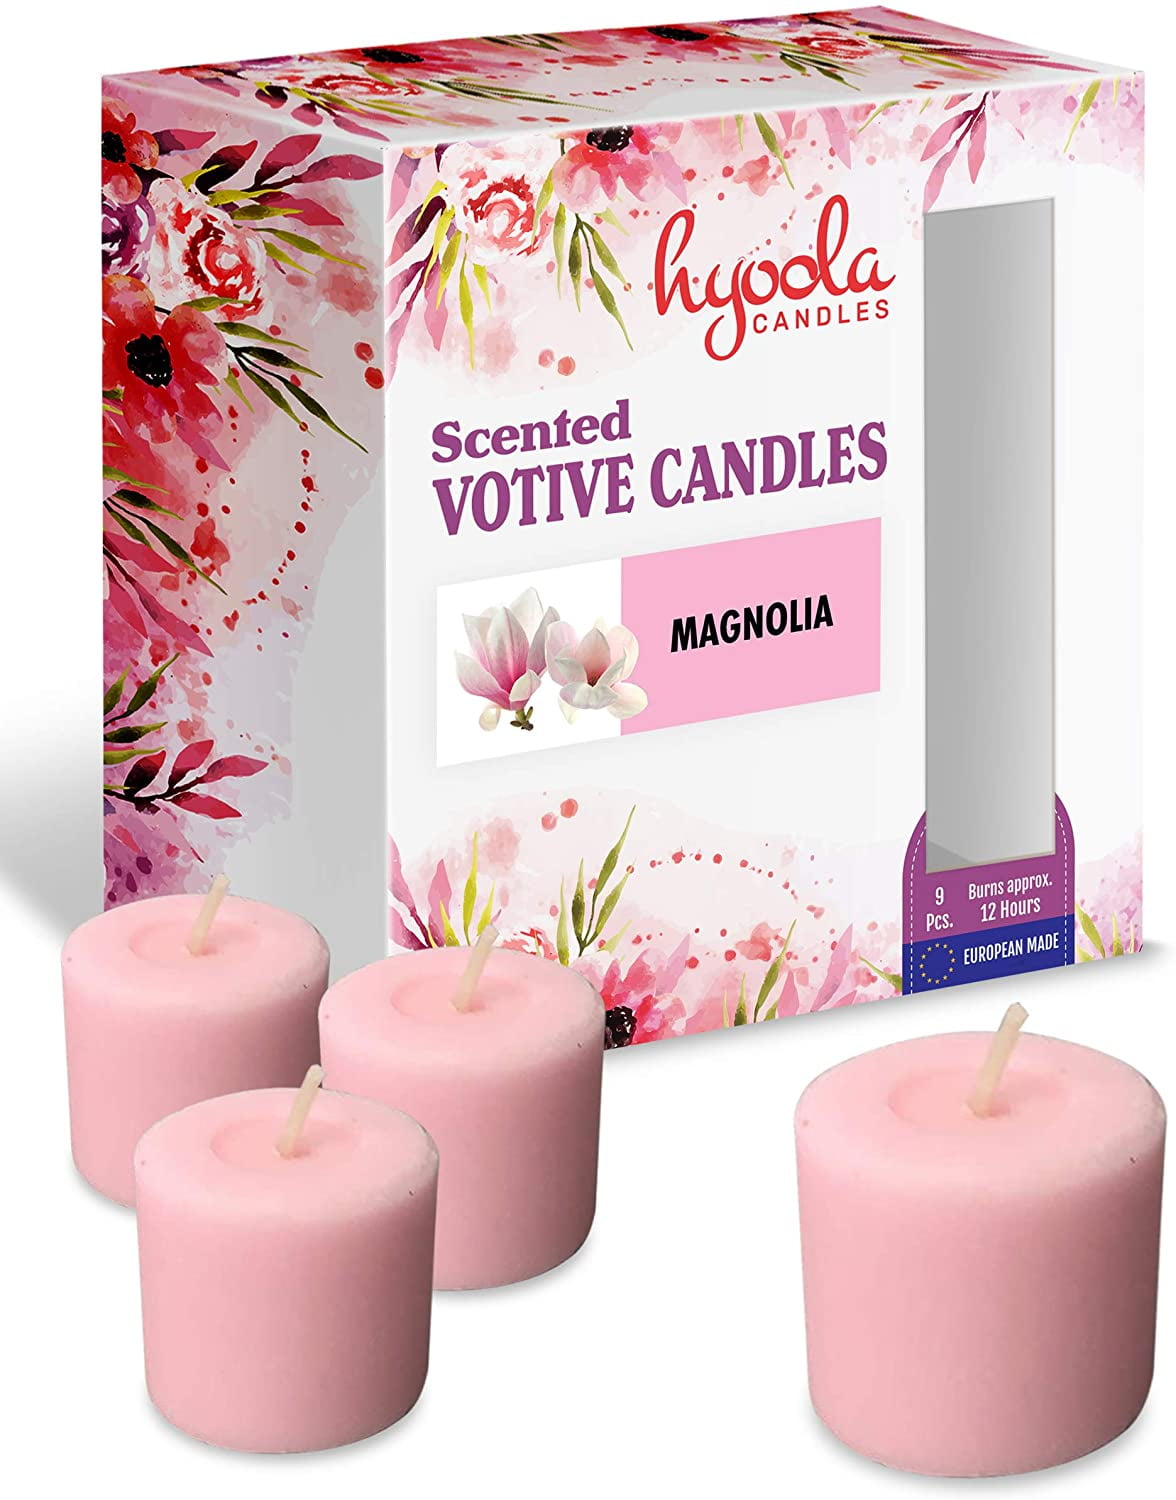 VOTIVE CANDLESYANKEE CANDLE YOU CHOOSE 12 VARIATIONS FREE SHIPPING 